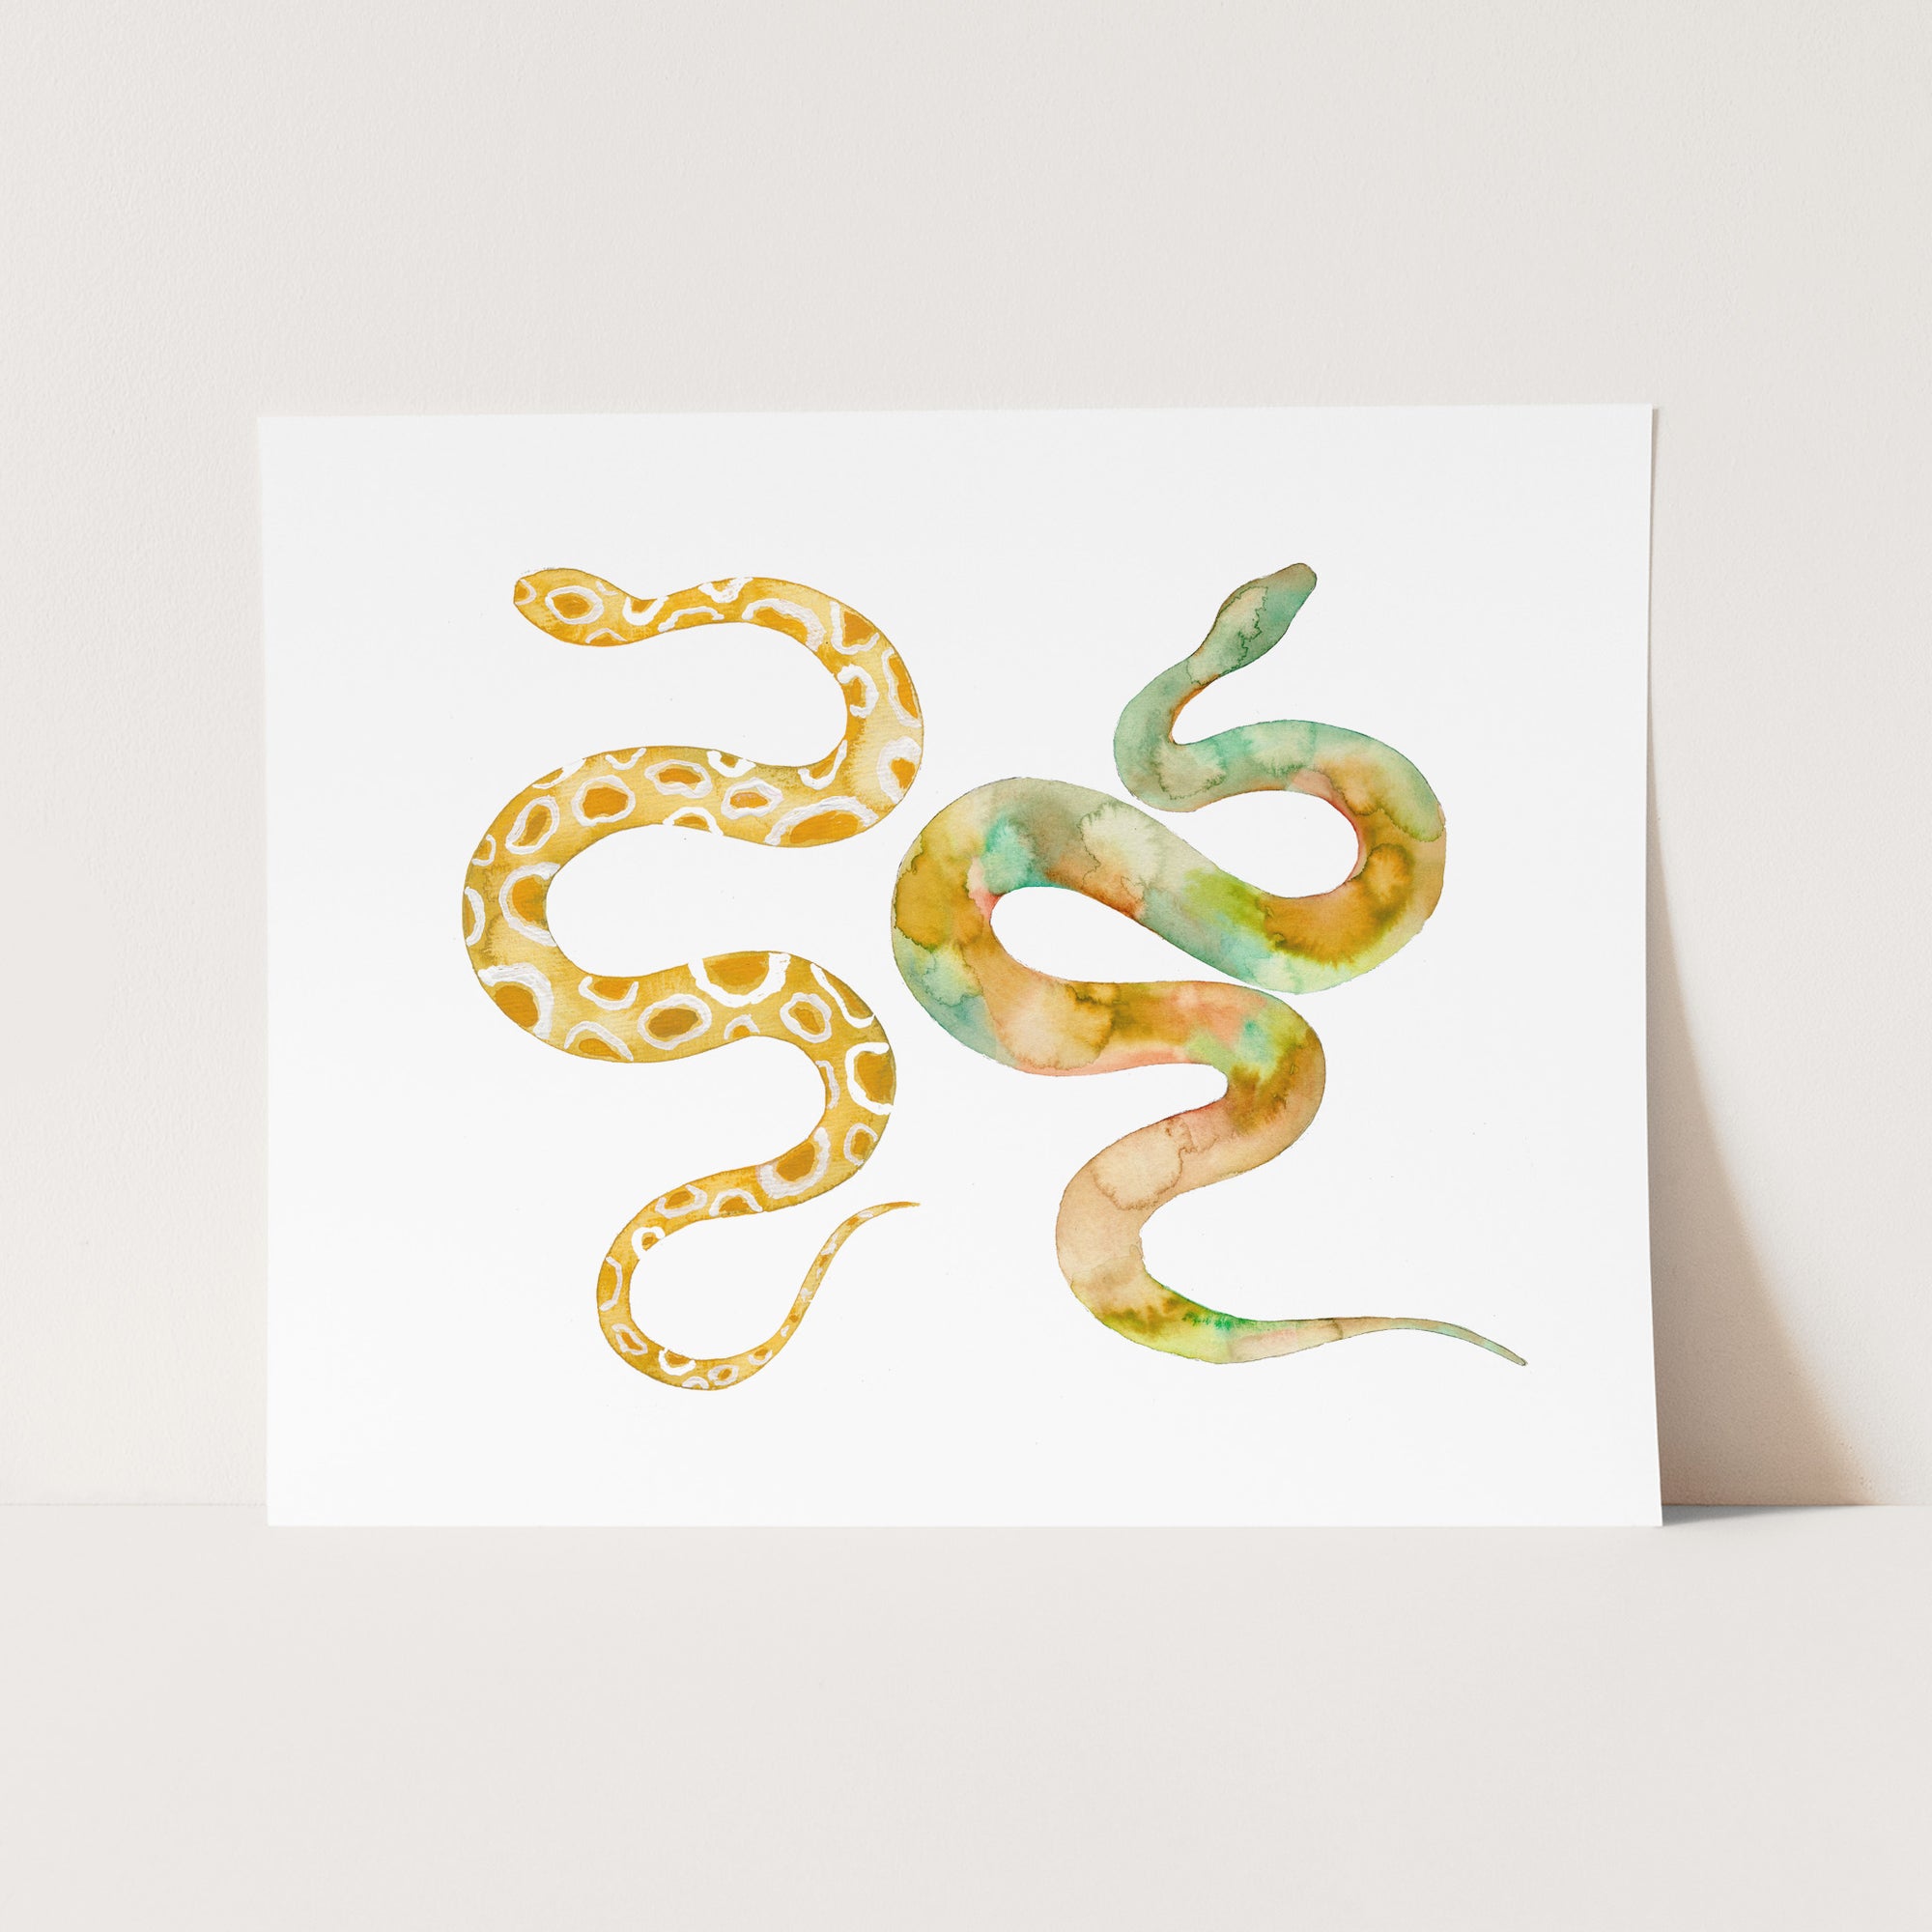 a painting of a snake on a white background